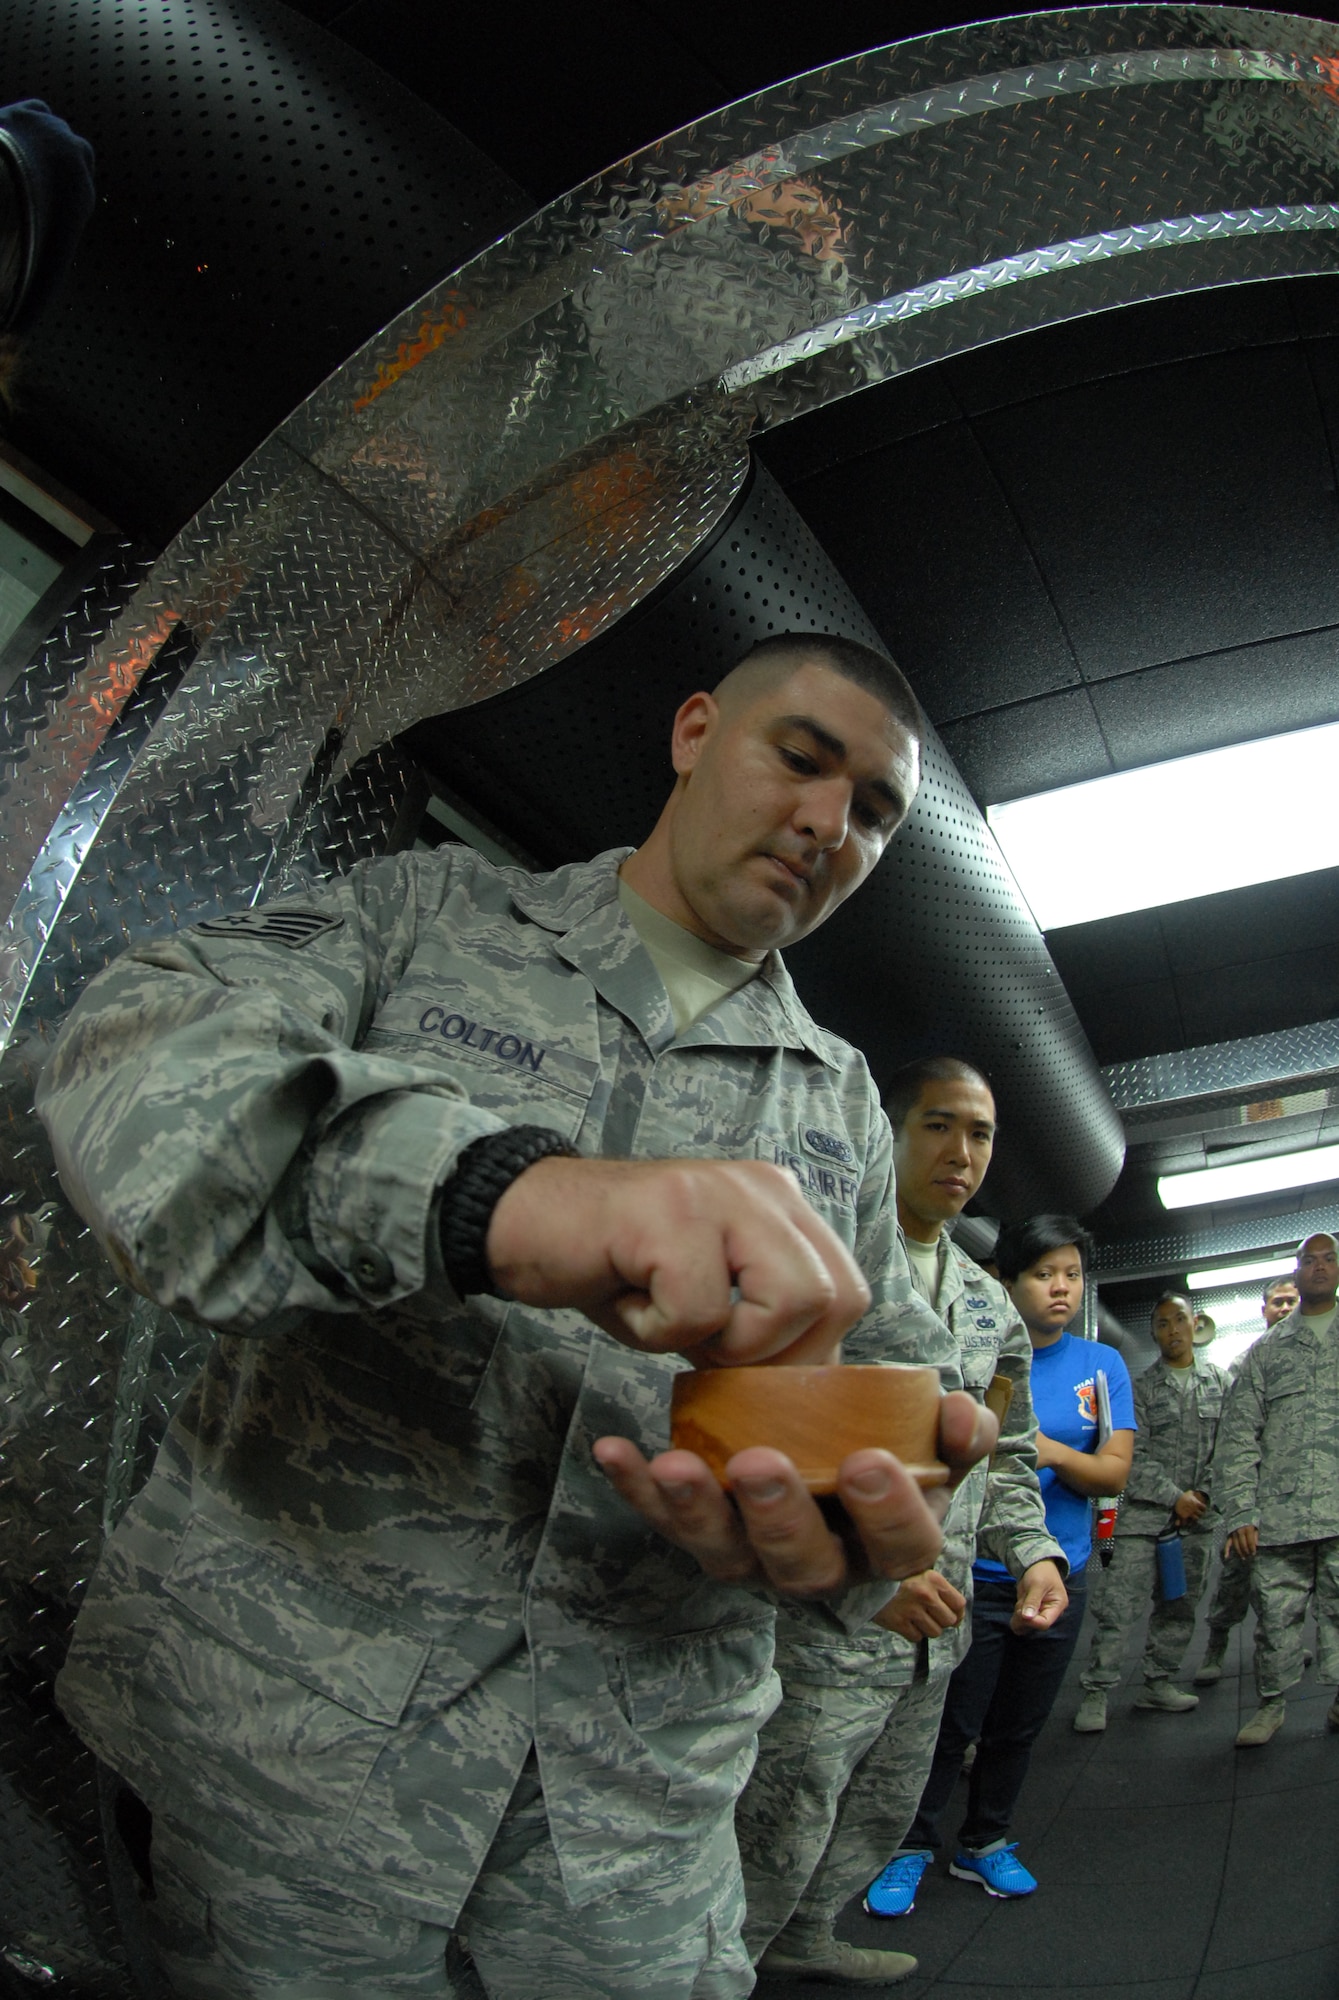 U.S. Air Force Staff Sgt Bronson Colton, 154th Security Forces Squadron (SFS), grabs a pinch of salt during the blessing ceremony of the 154th SFS Indoor Firing Range at Joint Base Pearl Harbor-Hickam, Hawaii, Aug. 8, 2015. Salt is spread throughout the facility by the Chaplain and members of the 154th SFS as a way to purify and protect the facility. (U.S. Air National Guard photo by Airman 1st Class Robert Cabuco)
